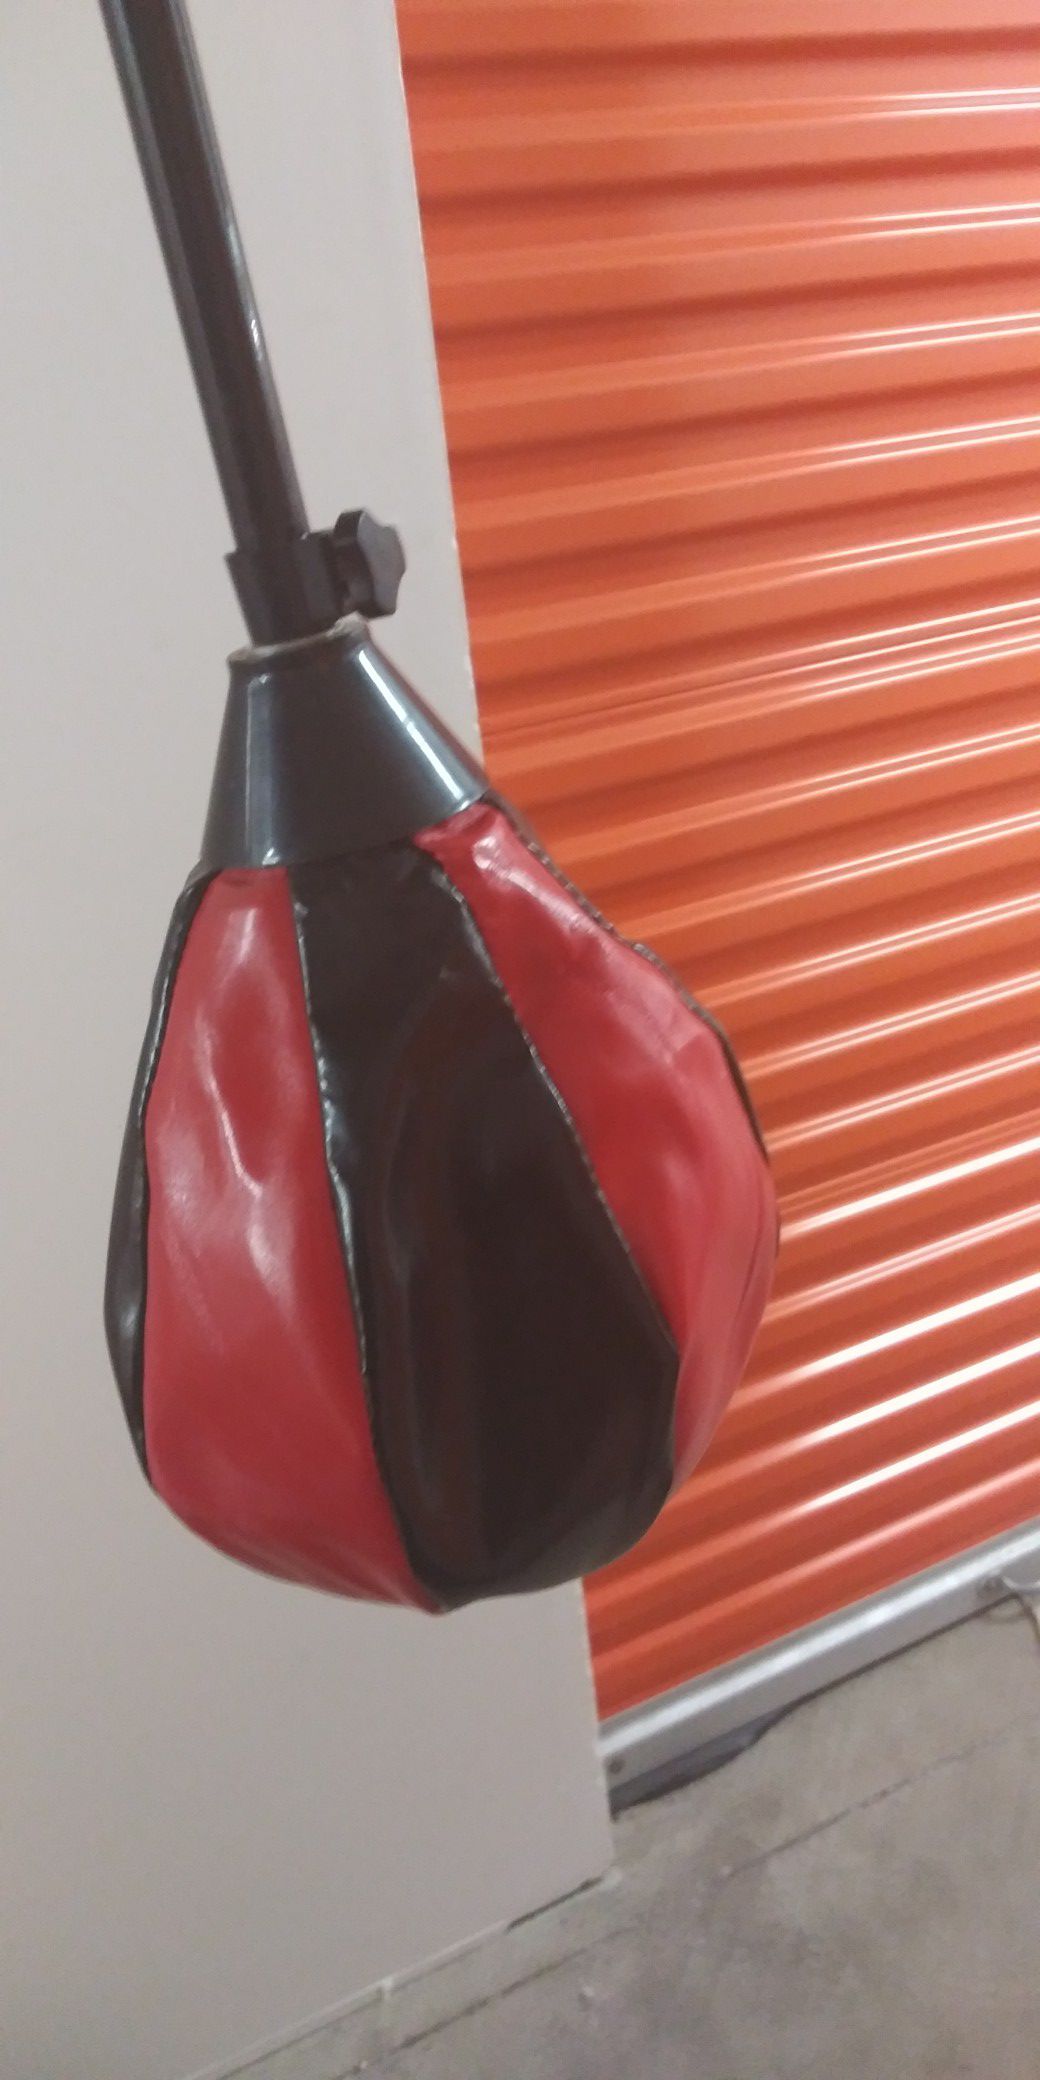 SPEED BAG WITH MOUNTING HARDWARE...JUST NEED A BOXER TO PUNCH IT...QUALITY..CASH/TRADE...